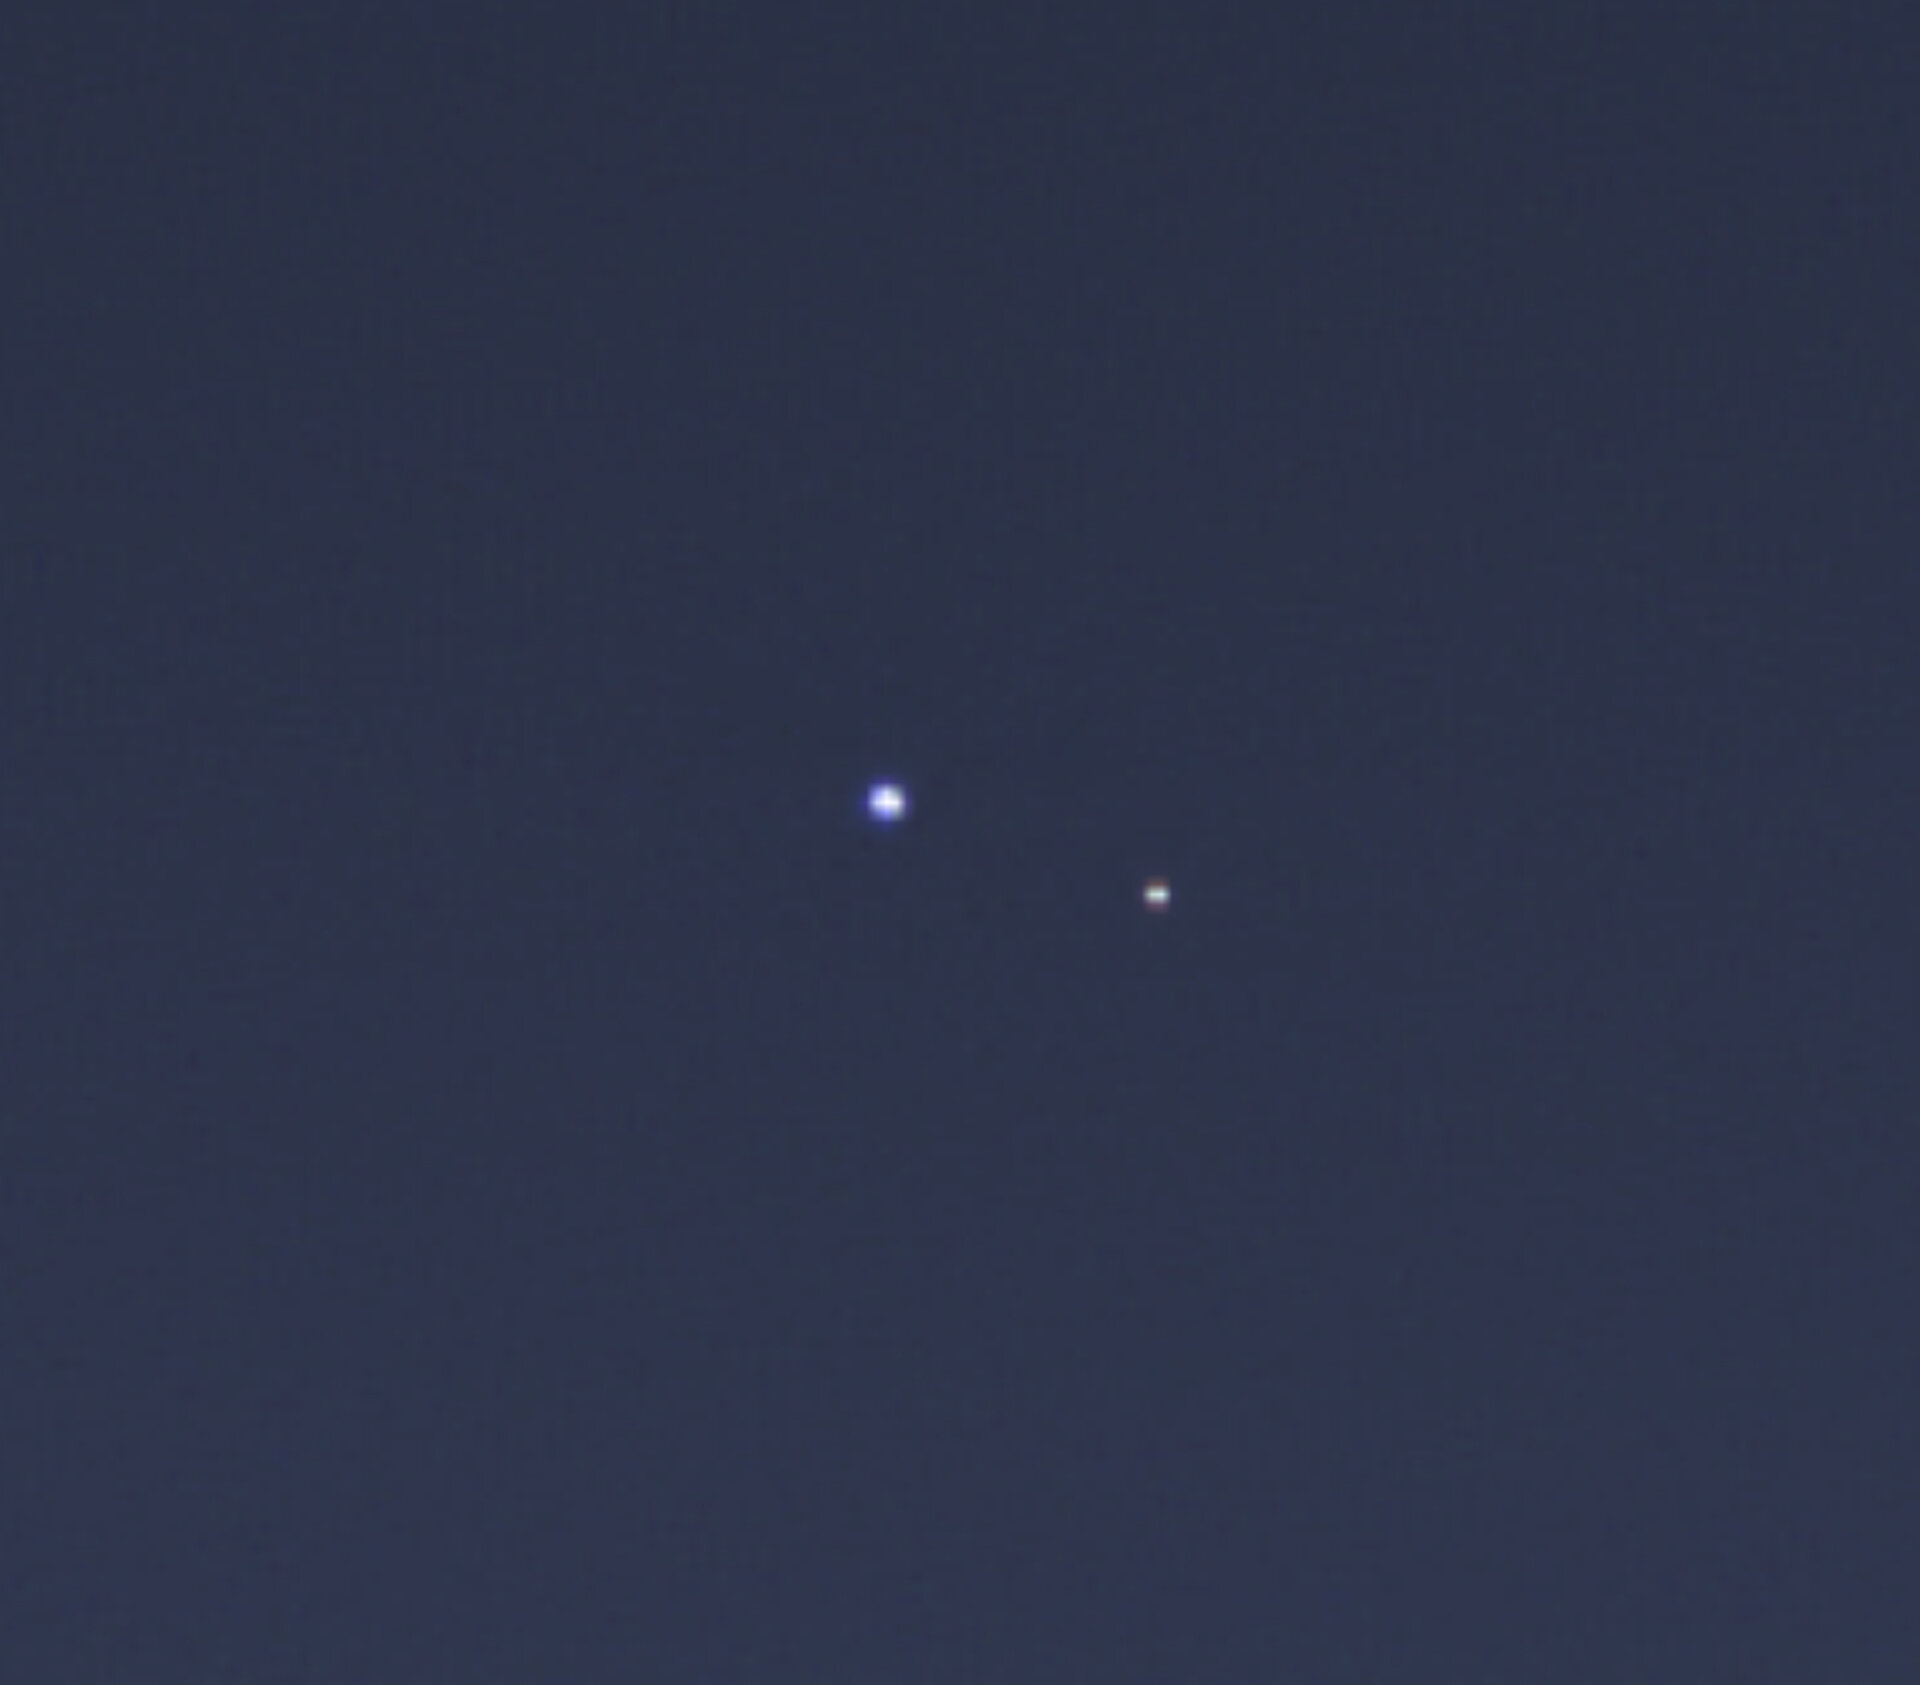 Earth and Moon close up